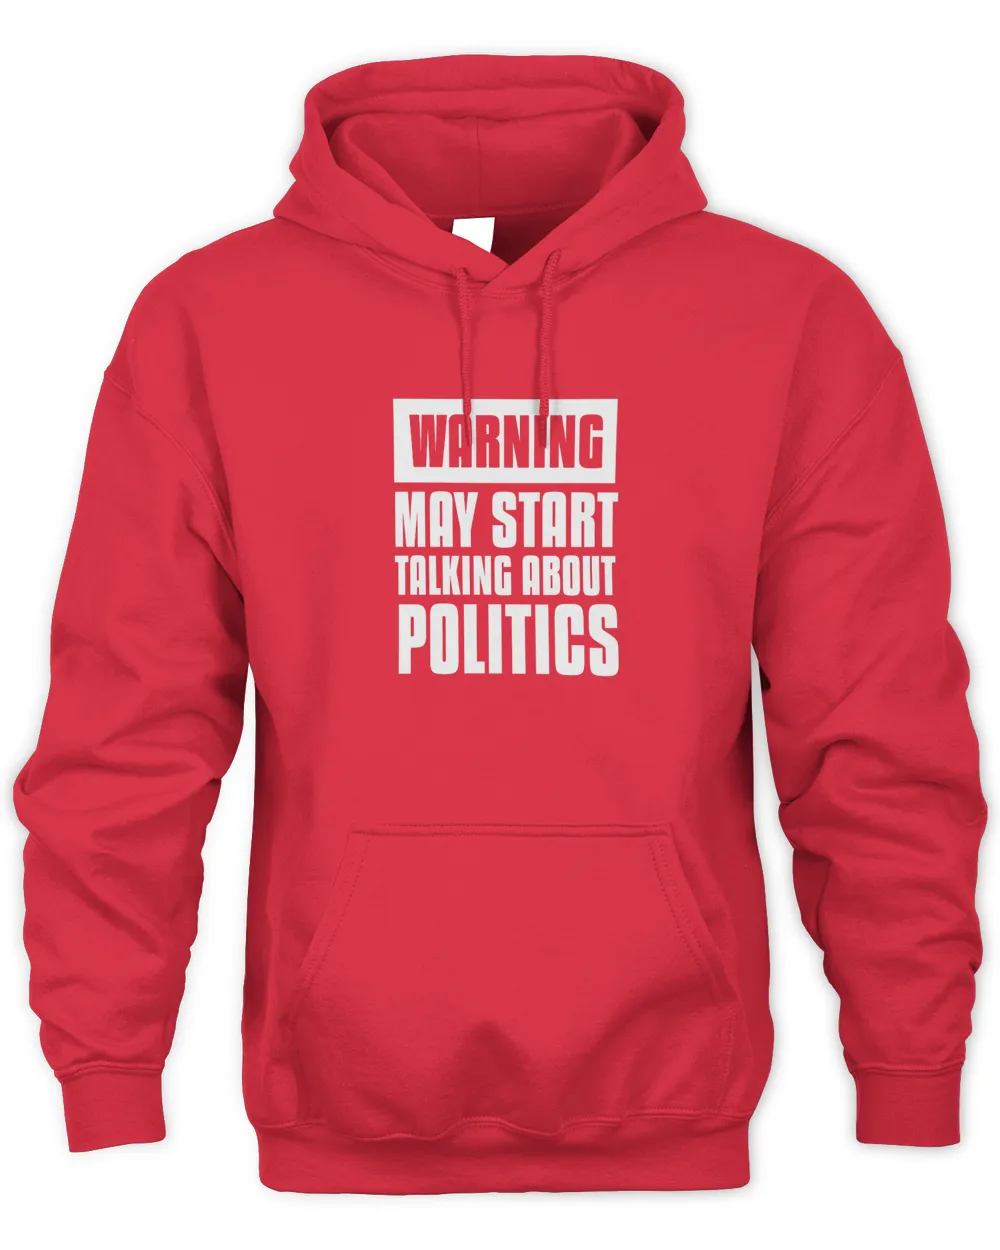 Funny Political T Shirts Gift For Political Junkie